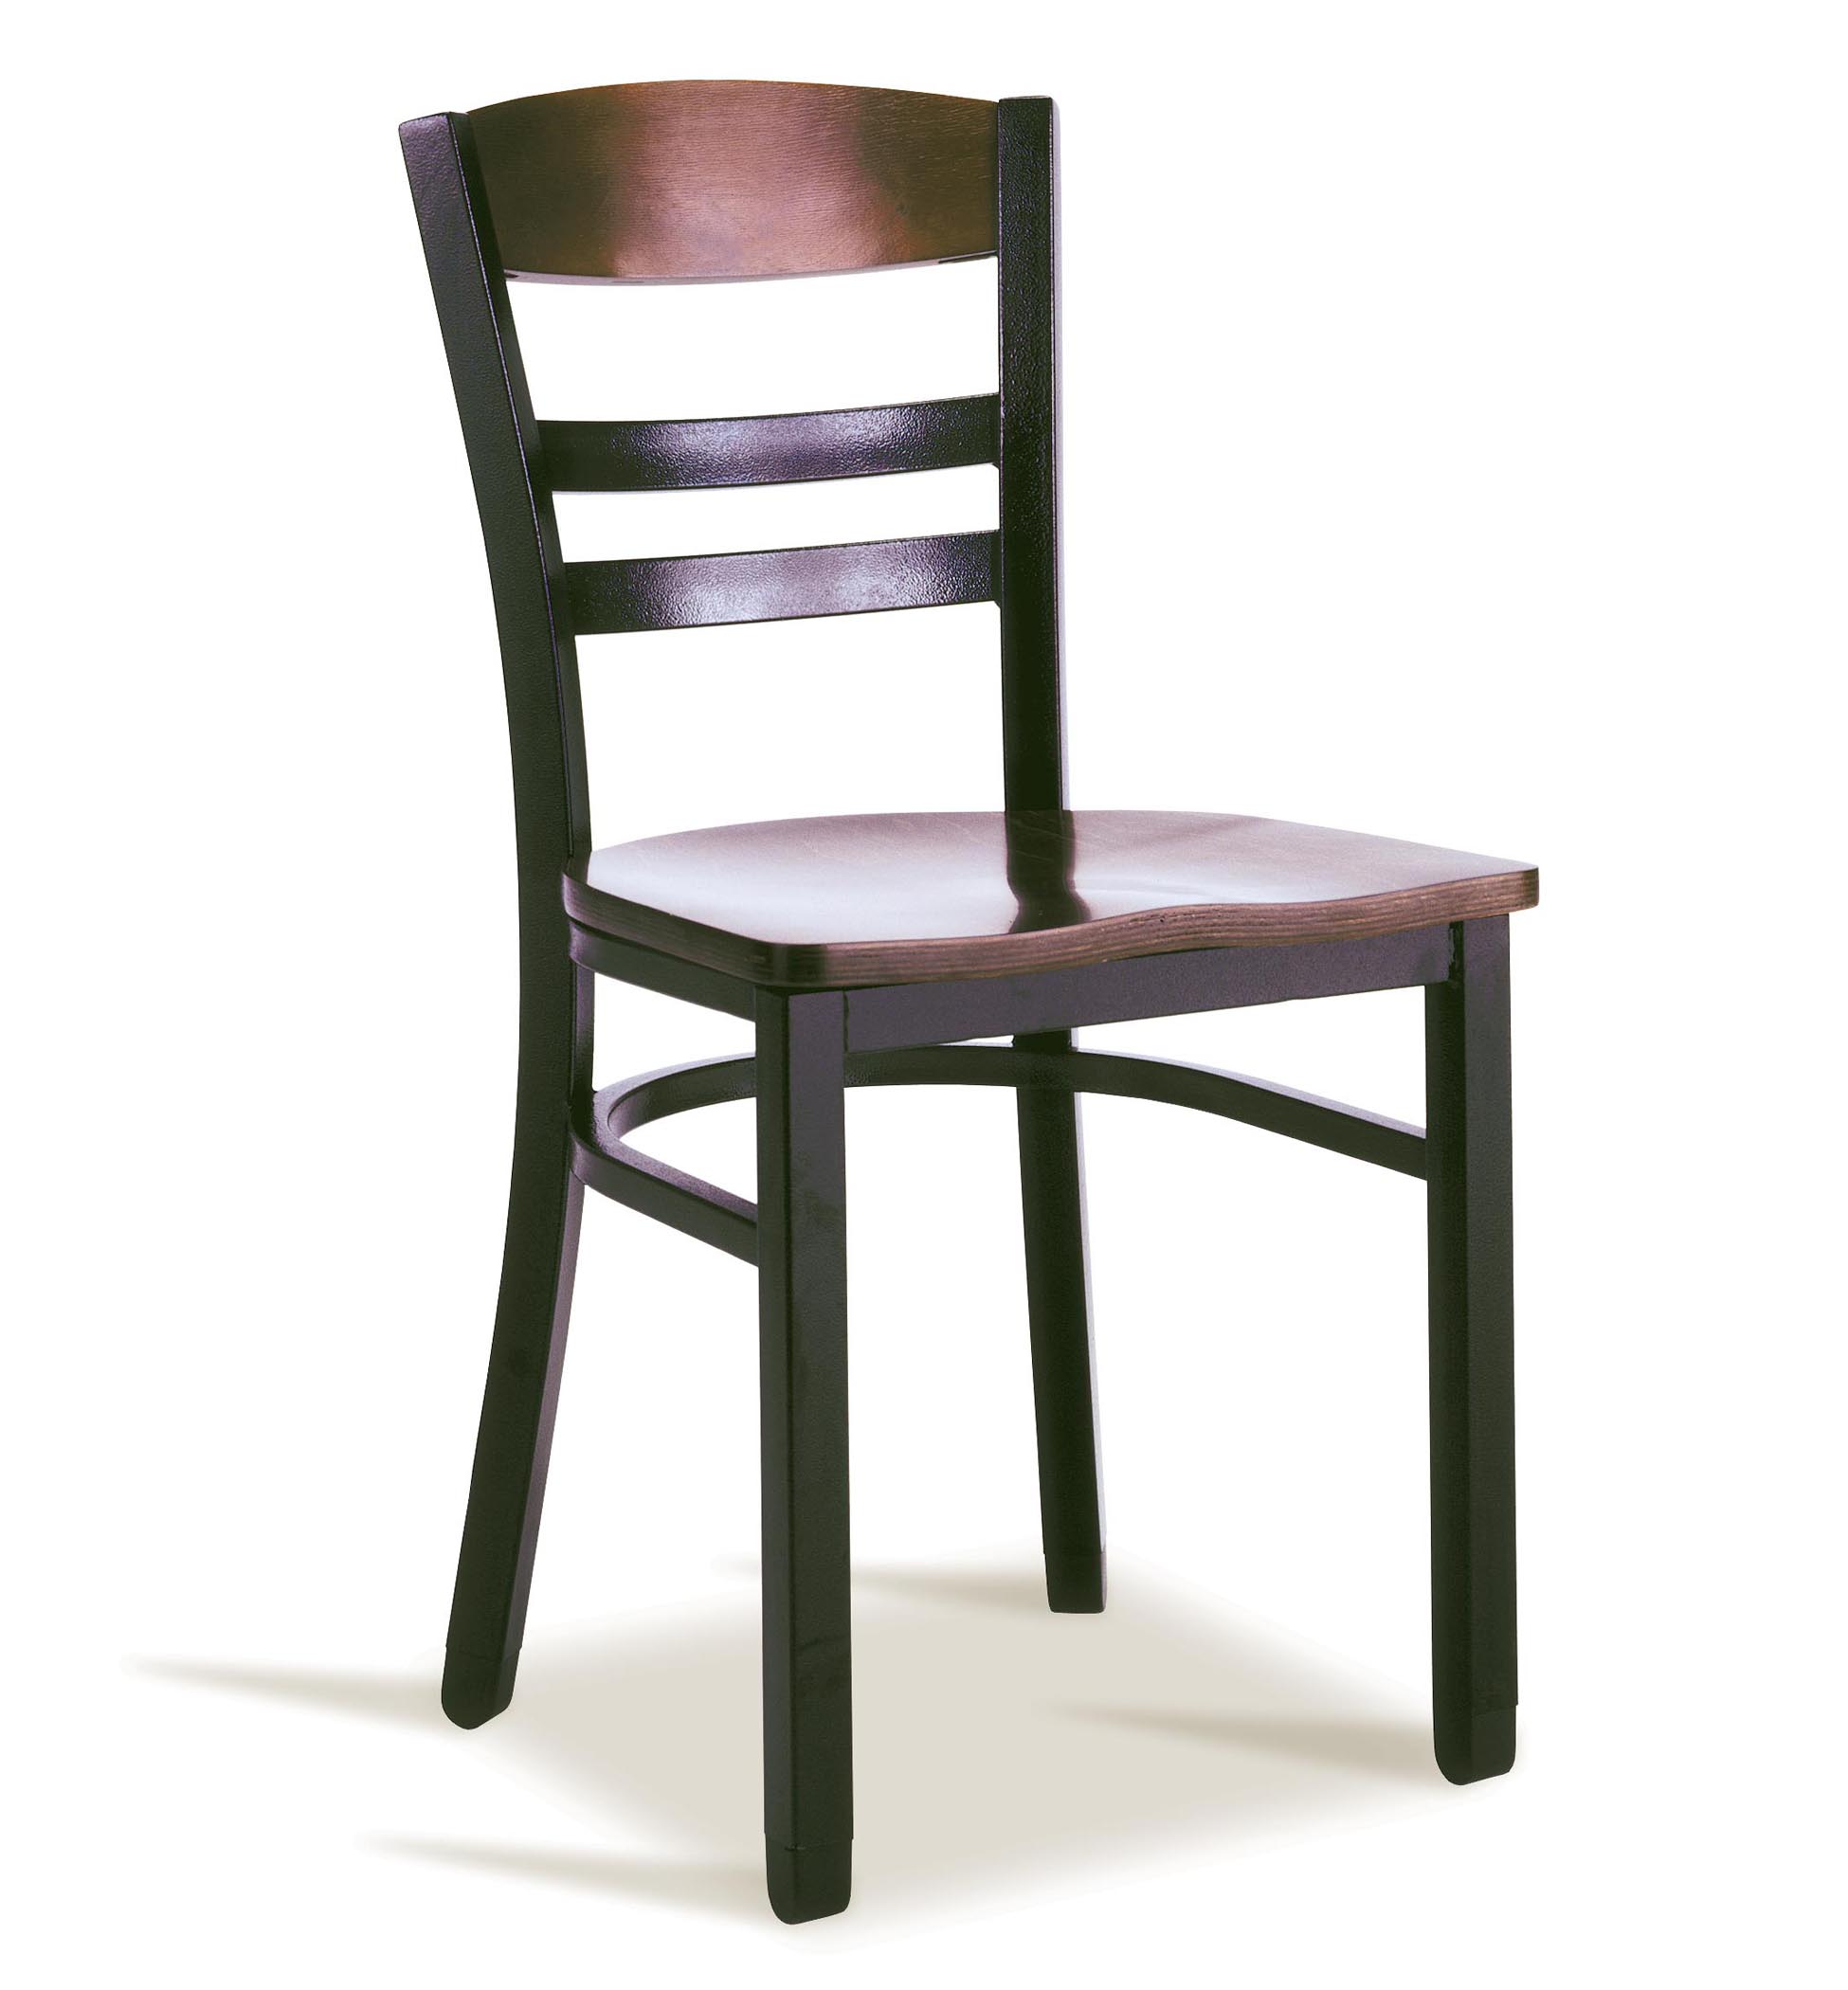 SR843 Metal Chair | Shelby Williams